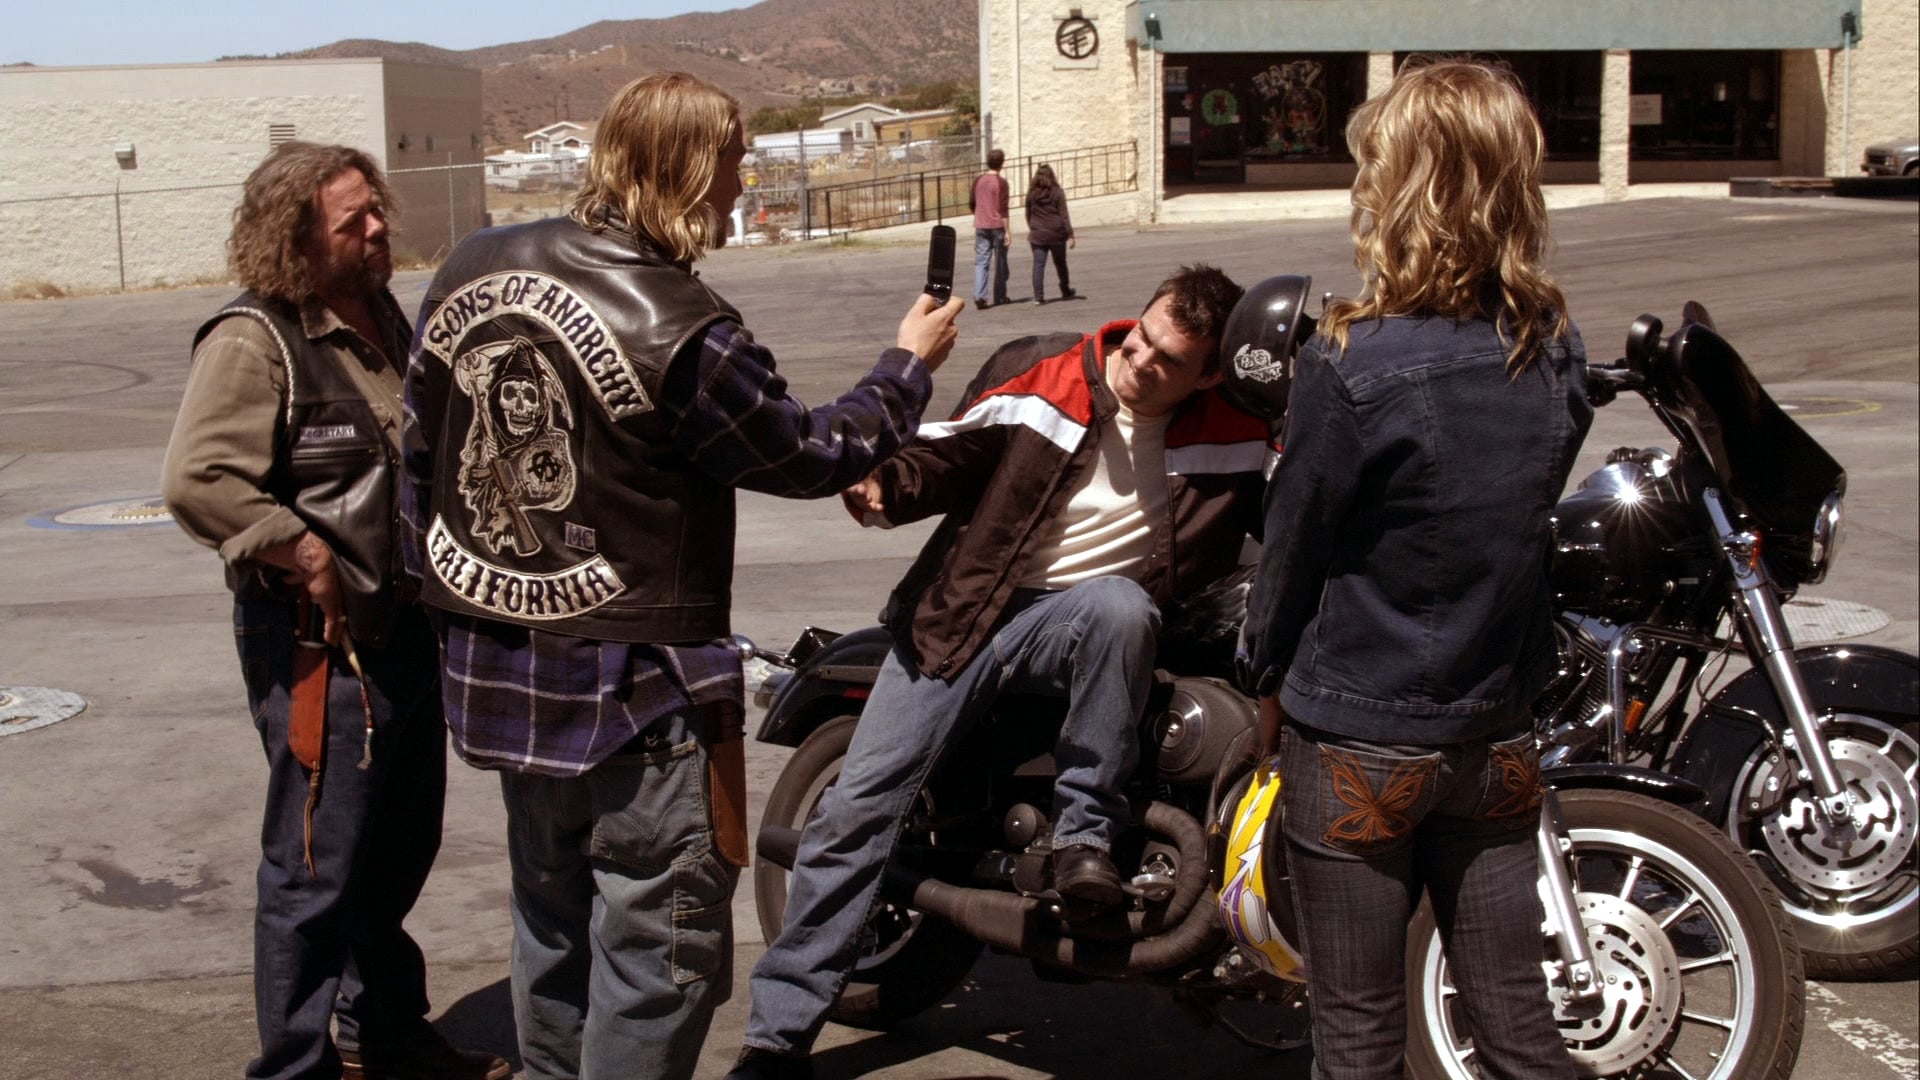 Sons of Anarchy: Season 1 Episode 4 - Patch Over.